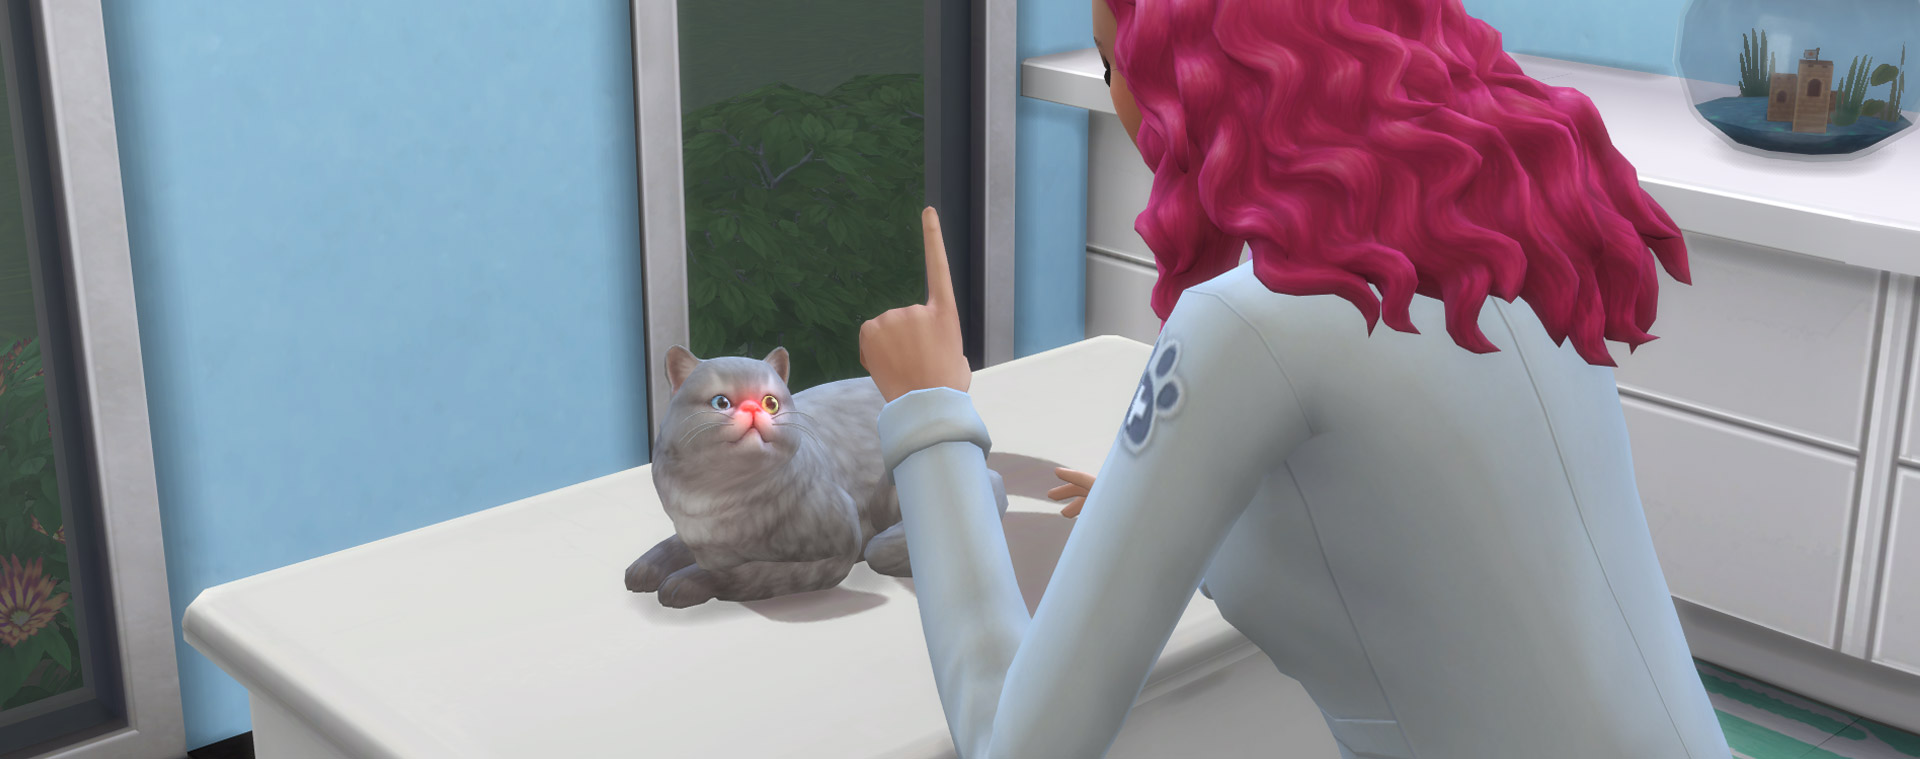 sims 4 cat and dog surgery